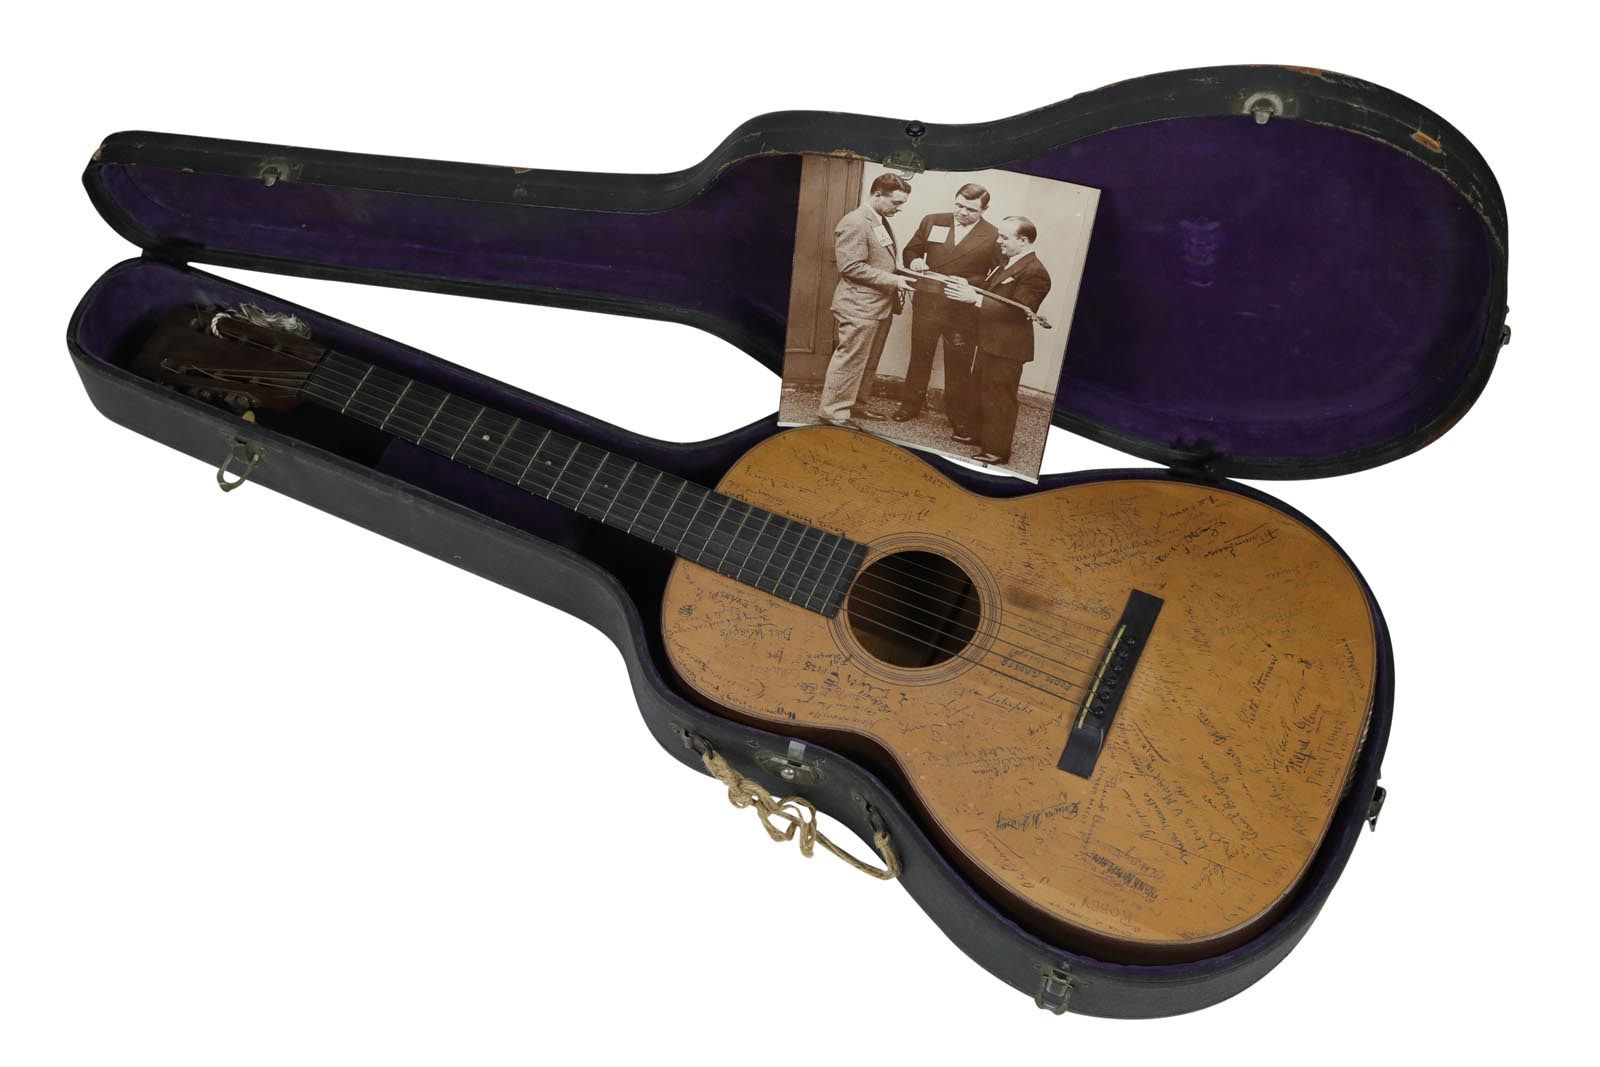 1928 Babe Ruth & Lou Gehrig "Al Smith Presidential Campaign" Signed Martin Guitar (PSA)